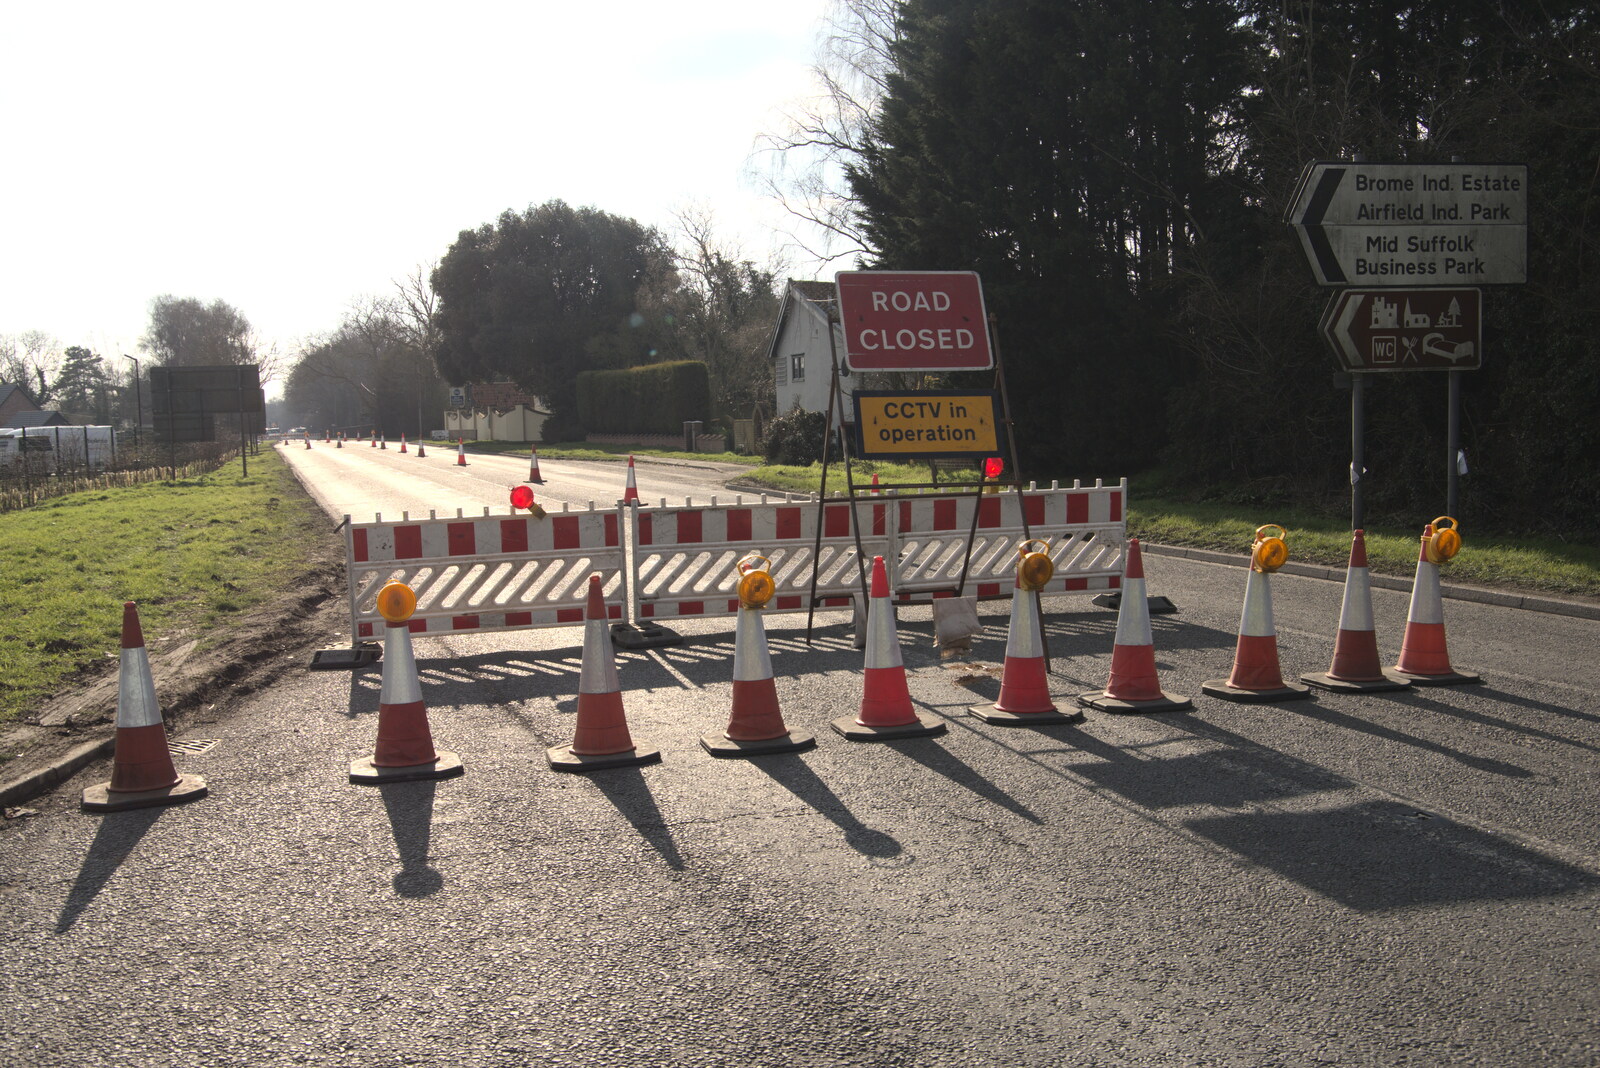 The A140 is completely shut from Fred's New Bike and an A140 Closure, Brome, Suffolk - 27th February 2021